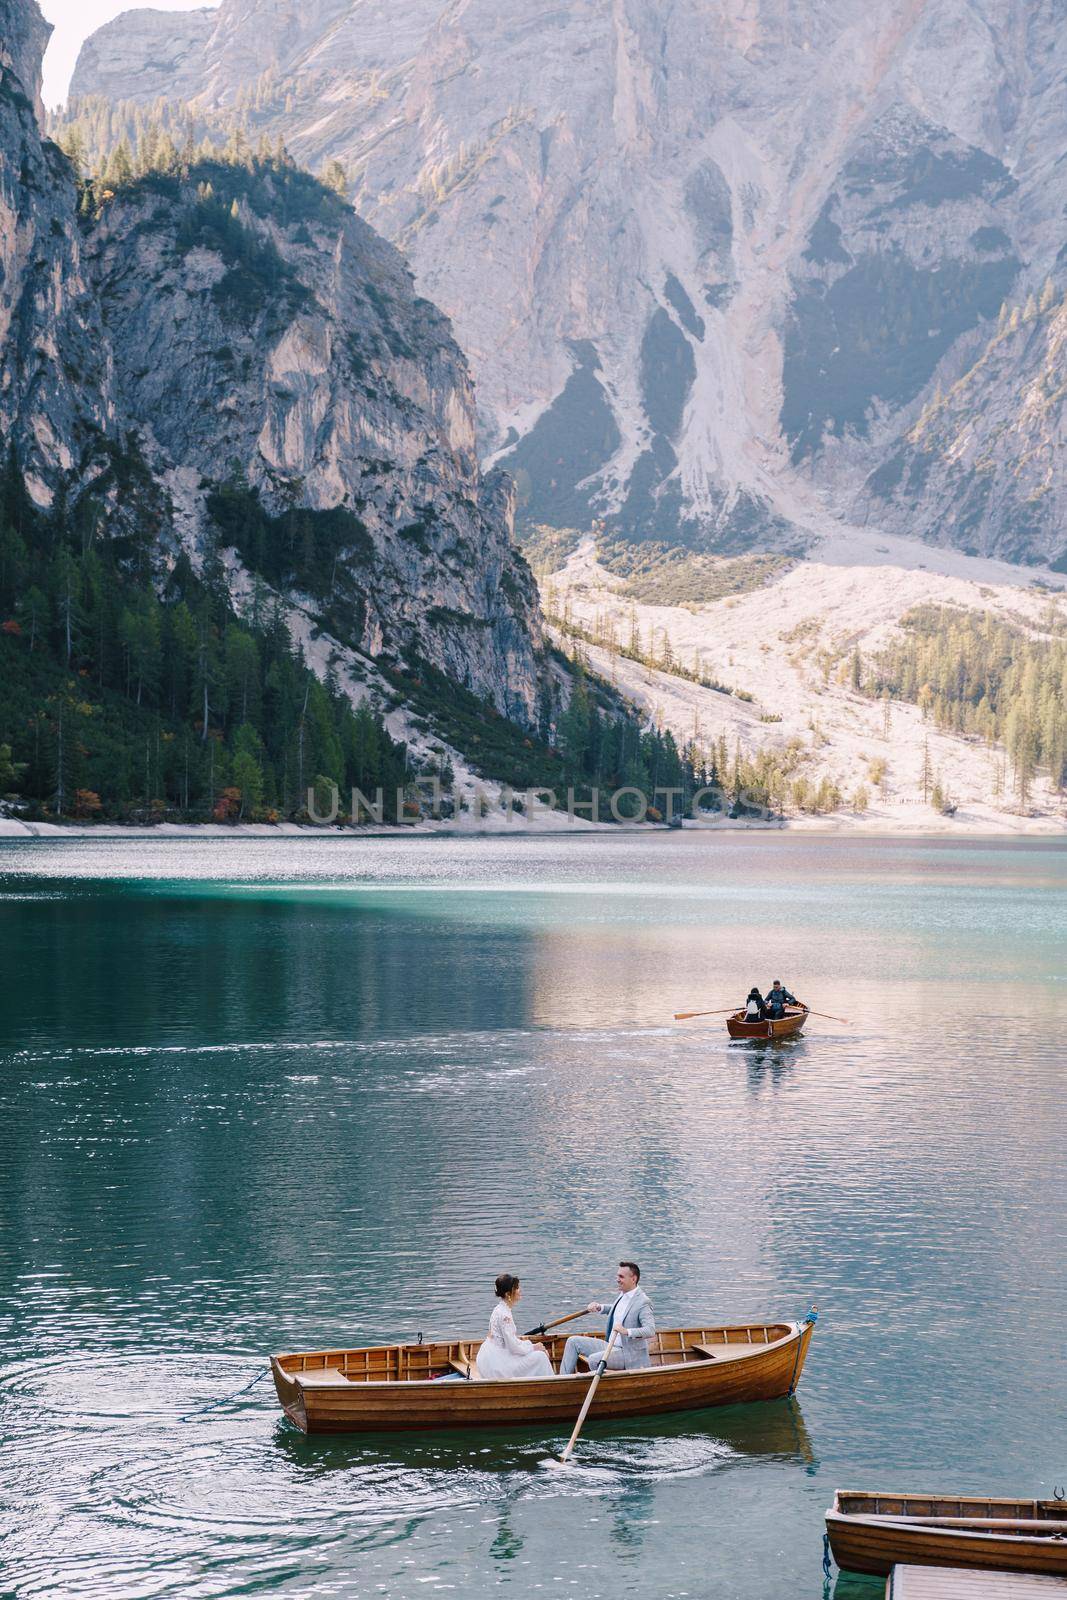 Wedding couple swim in a wooden boat on Lago di Braies in Italy. Newlyweds in Europe, at Braies Lake, in the Dolomites. The groom rows with oars, the bride sits opposite him.